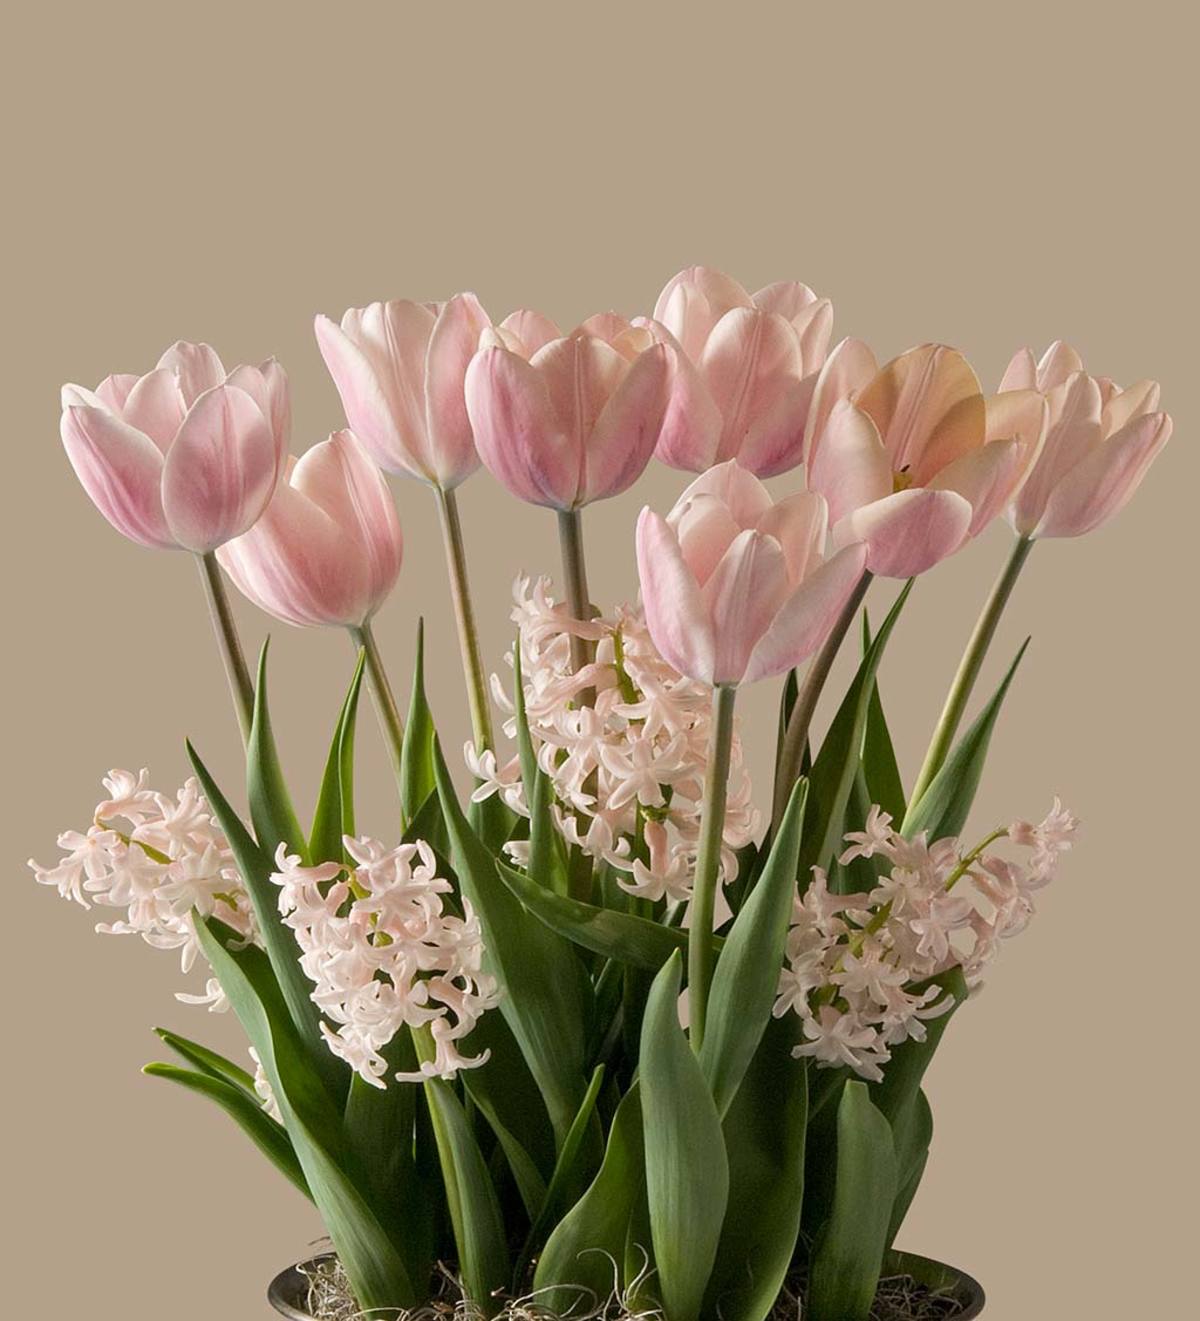 February Apricot Beauty Tulips & China Pink Hyacinths Bulbs in Seagrass Basket